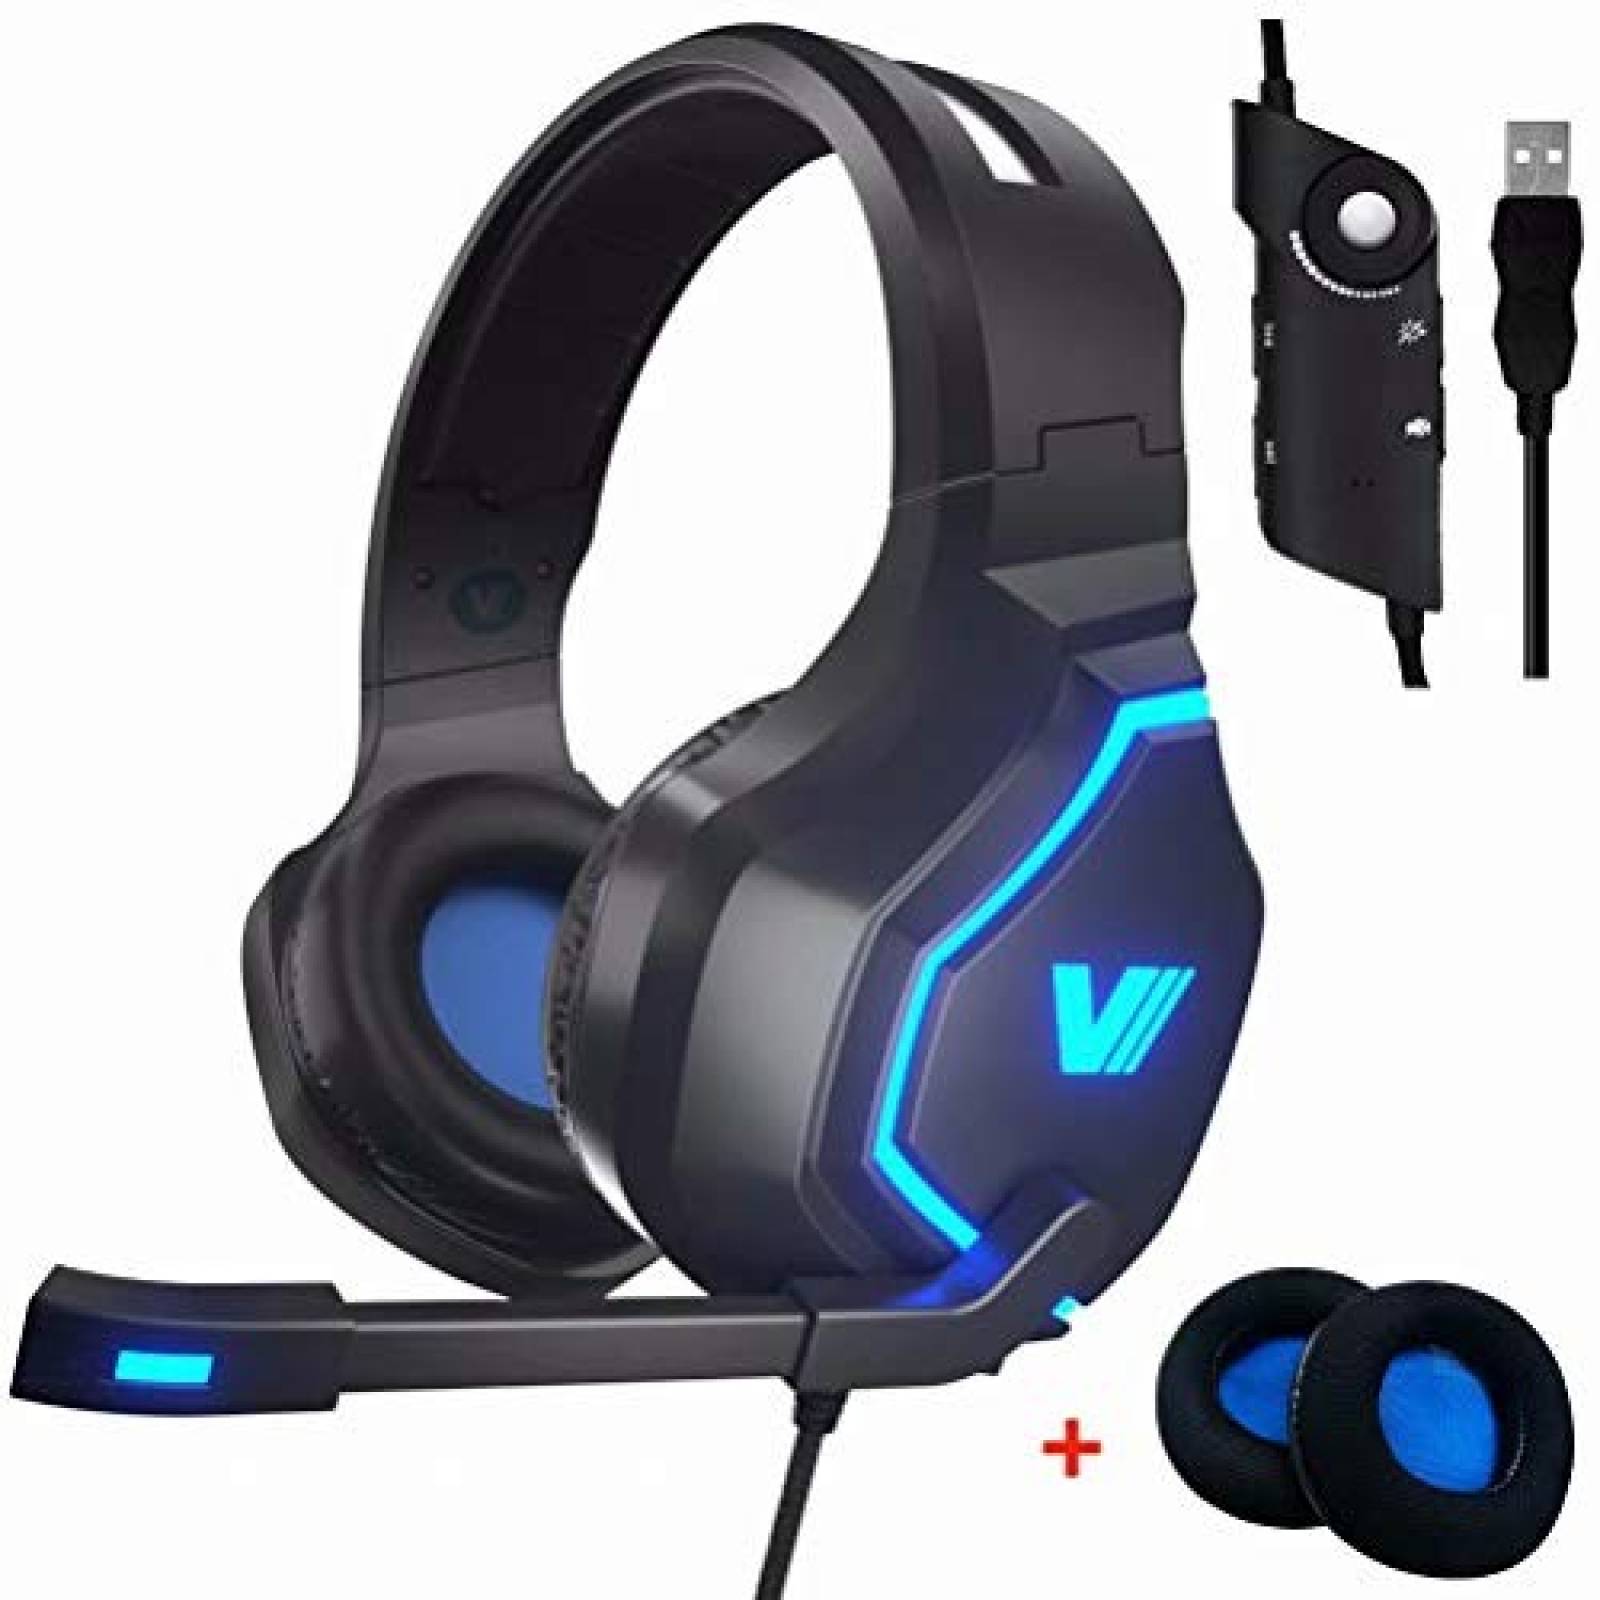 Auriculares VWELL PS4 PC LED multicolor sonido envolvente